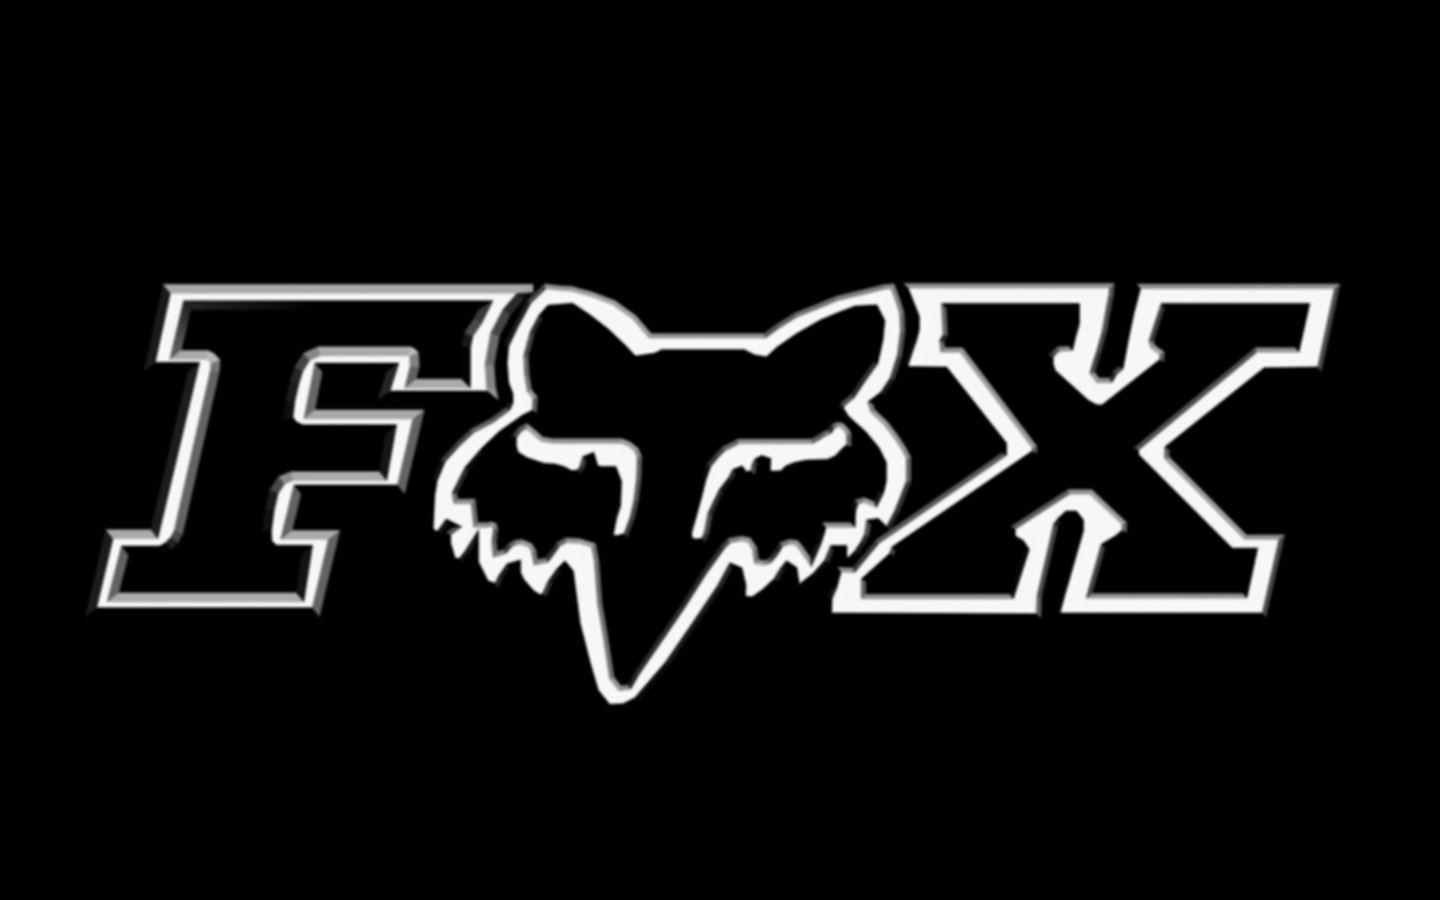 Cool Fox and Monster Logo - Cool Fox Racing Wallpapers - Wallpaper Cave